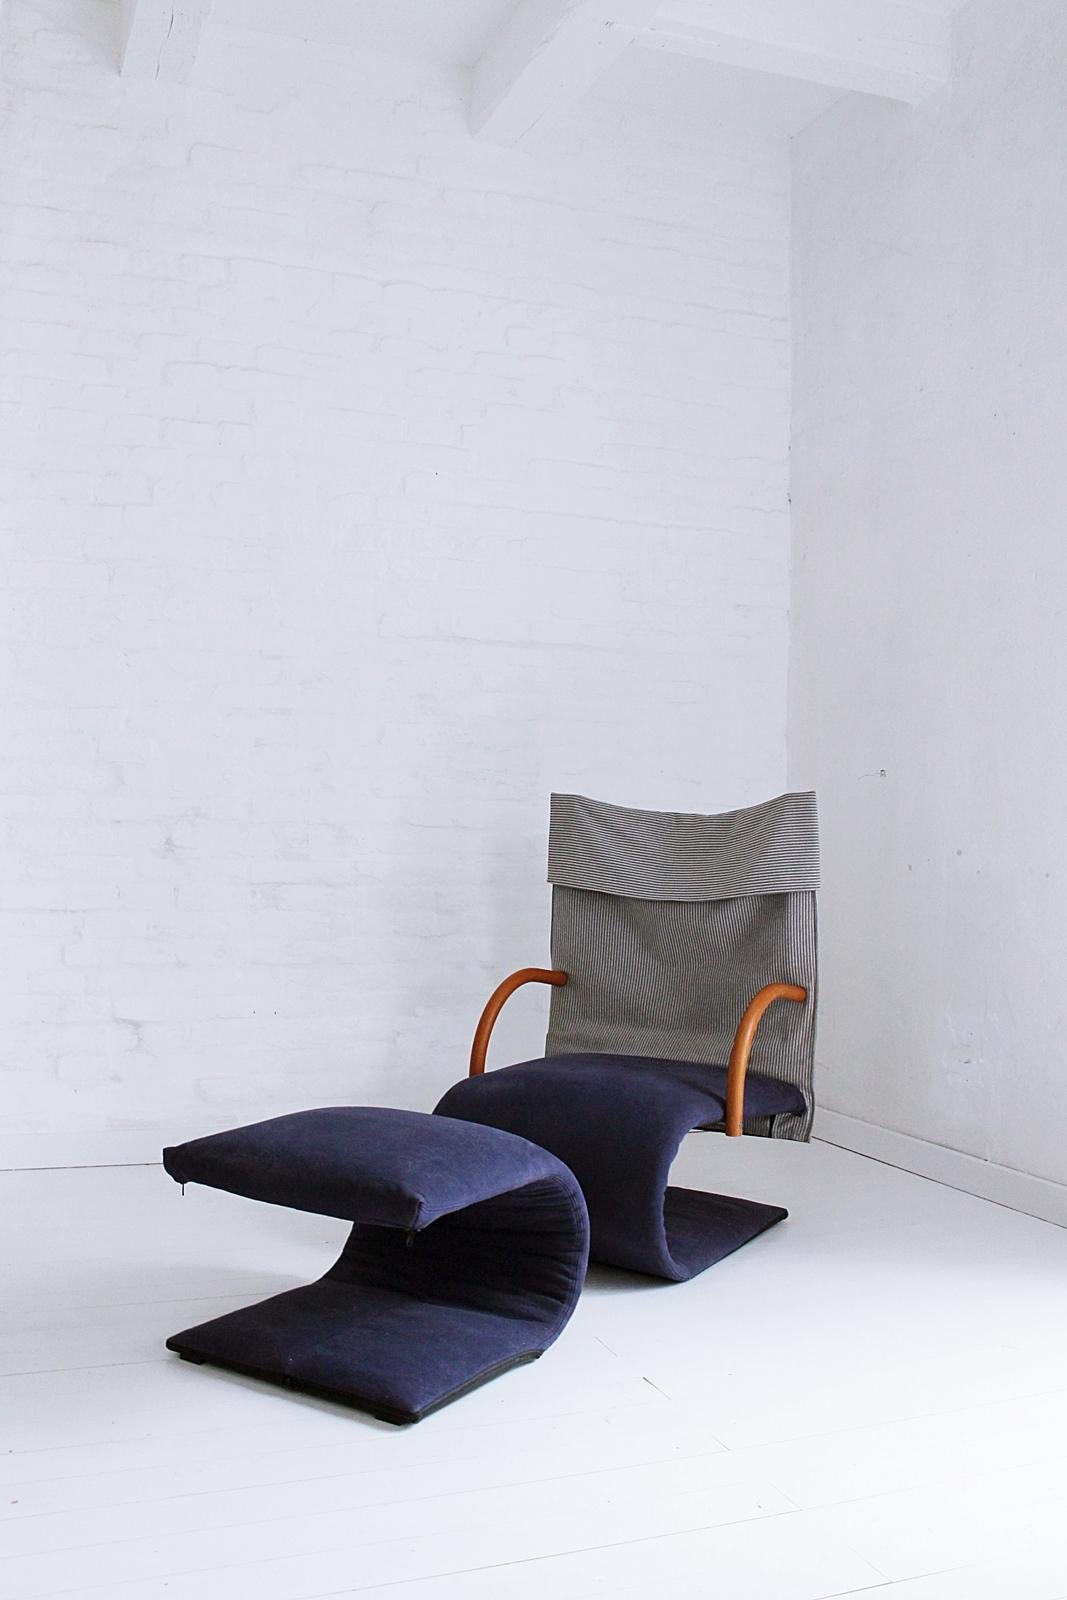 Late 20th Century Vintage French Zen Chair with Ottoman by Claude Brisson for Ligne Roset, 1980s